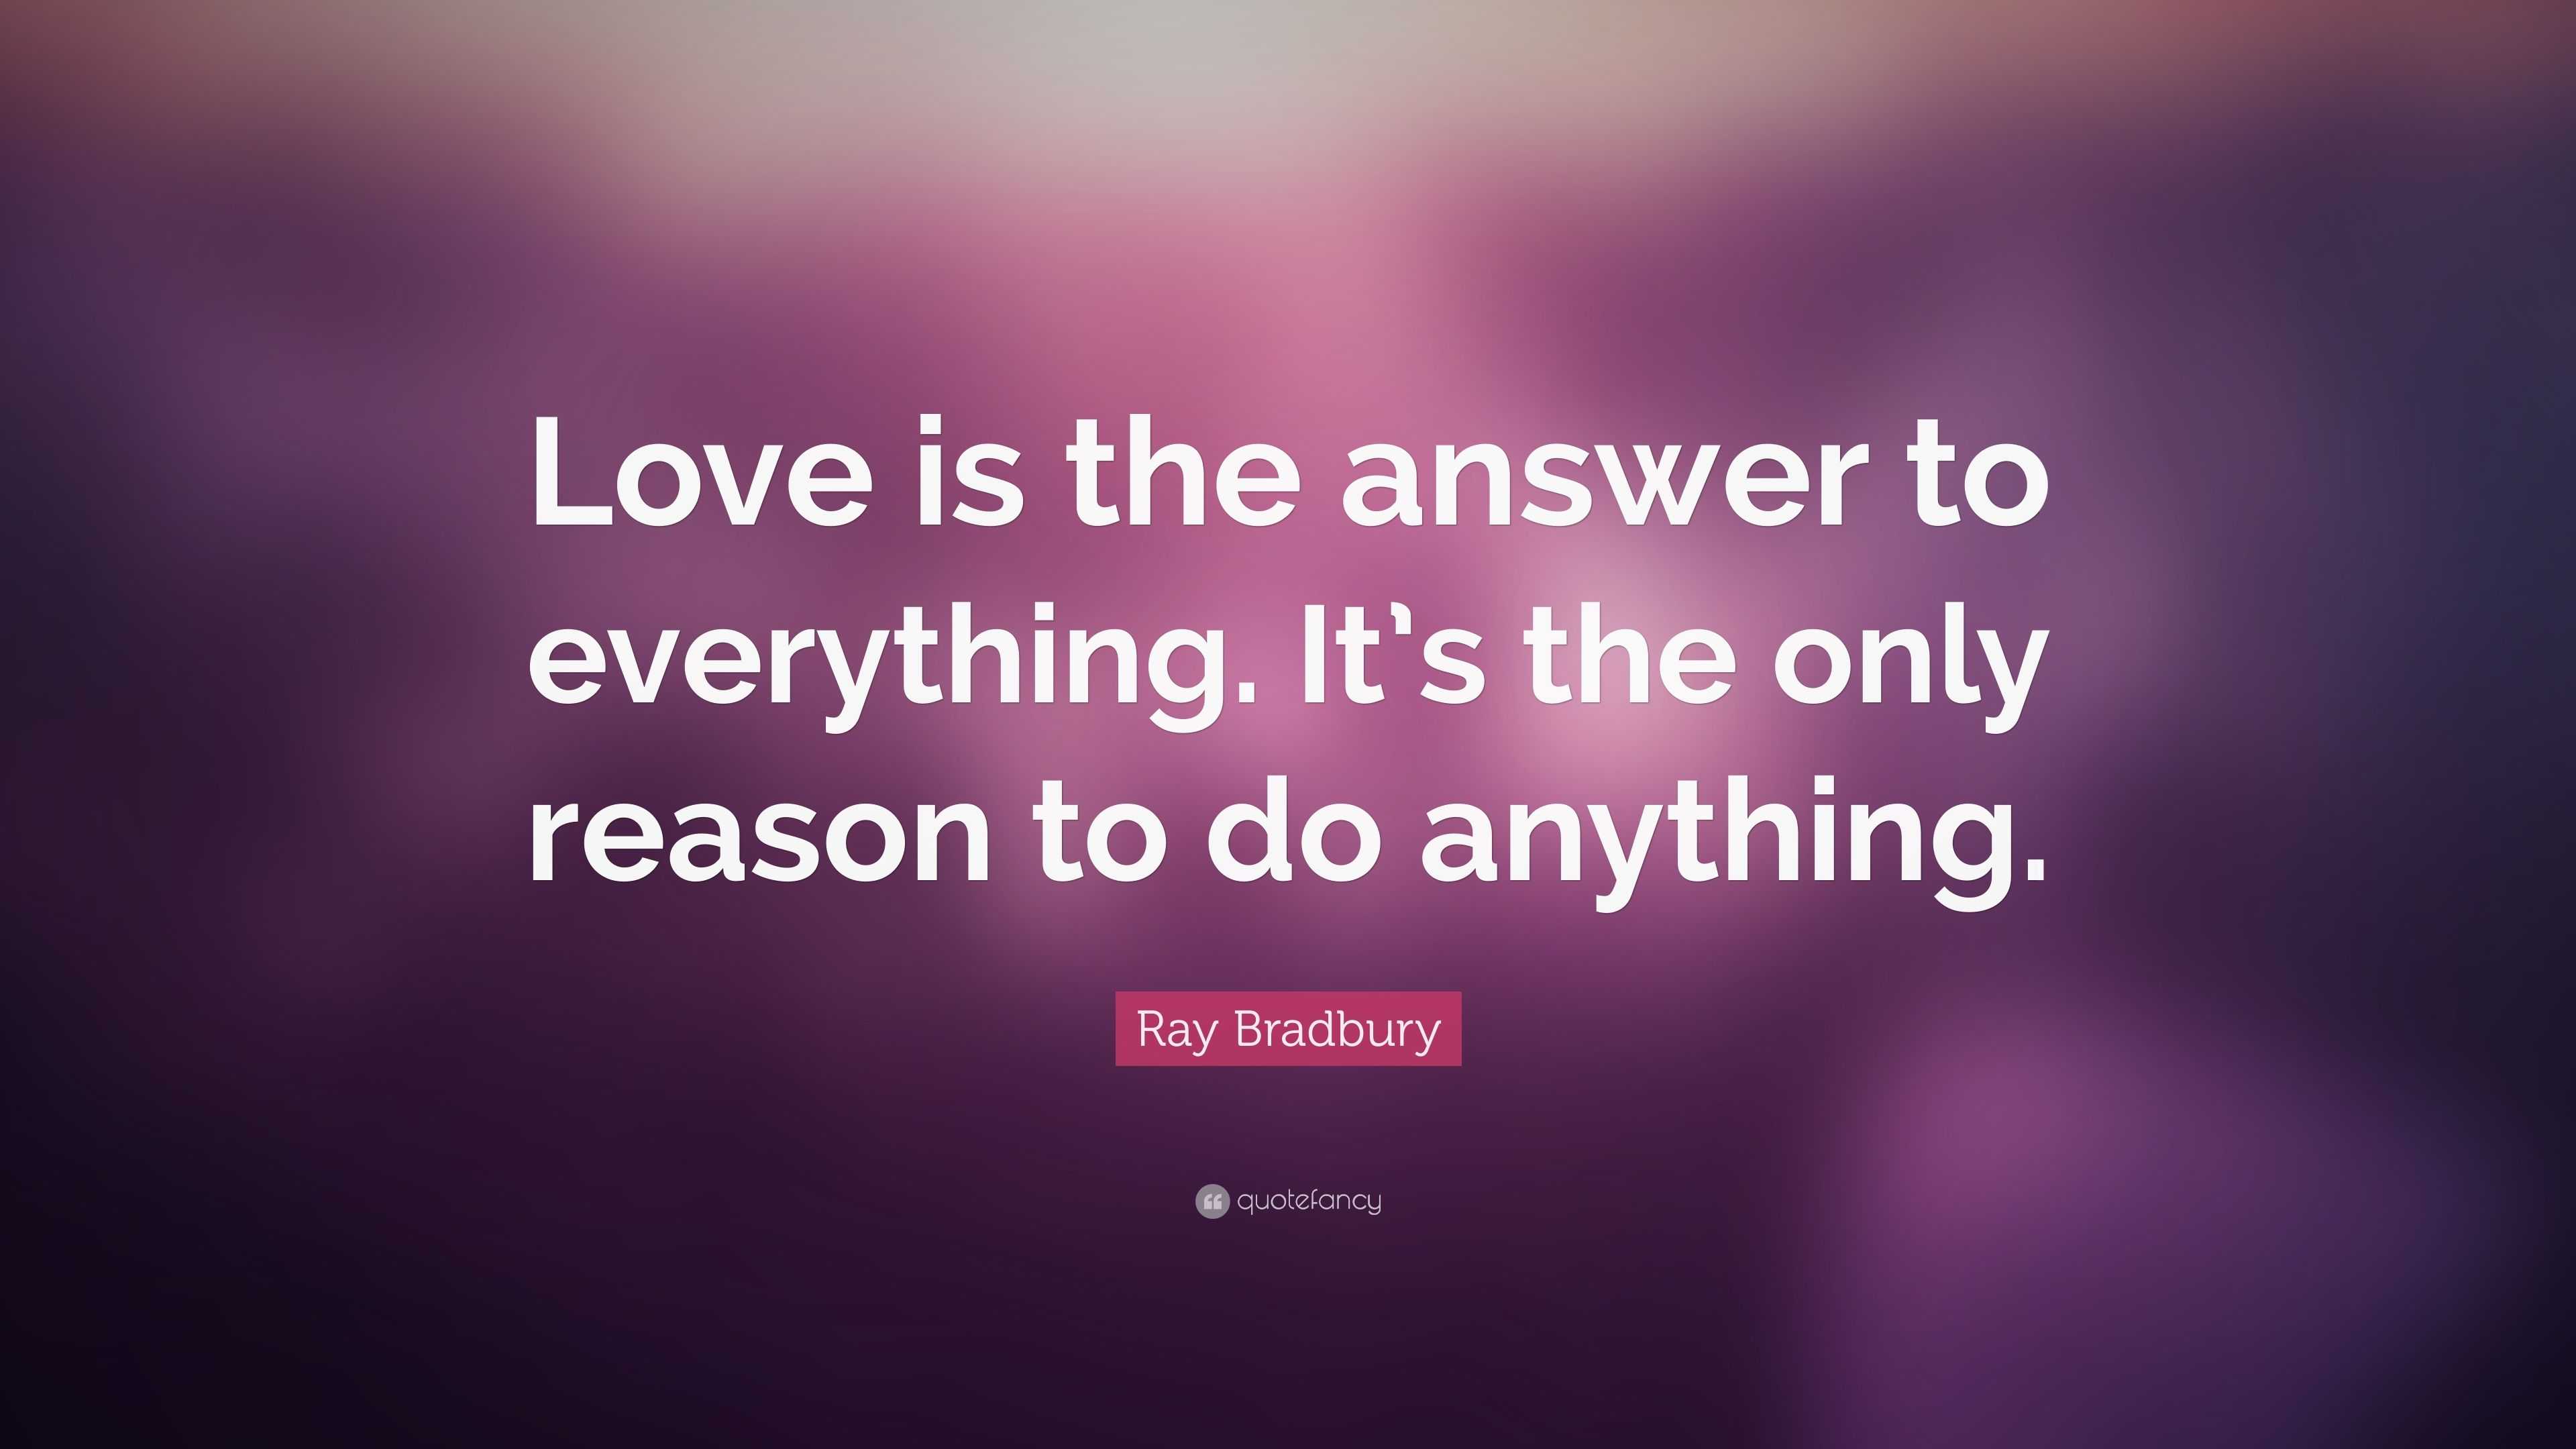 Ray Bradbury Quote: "Love is the answer to everything. It ...